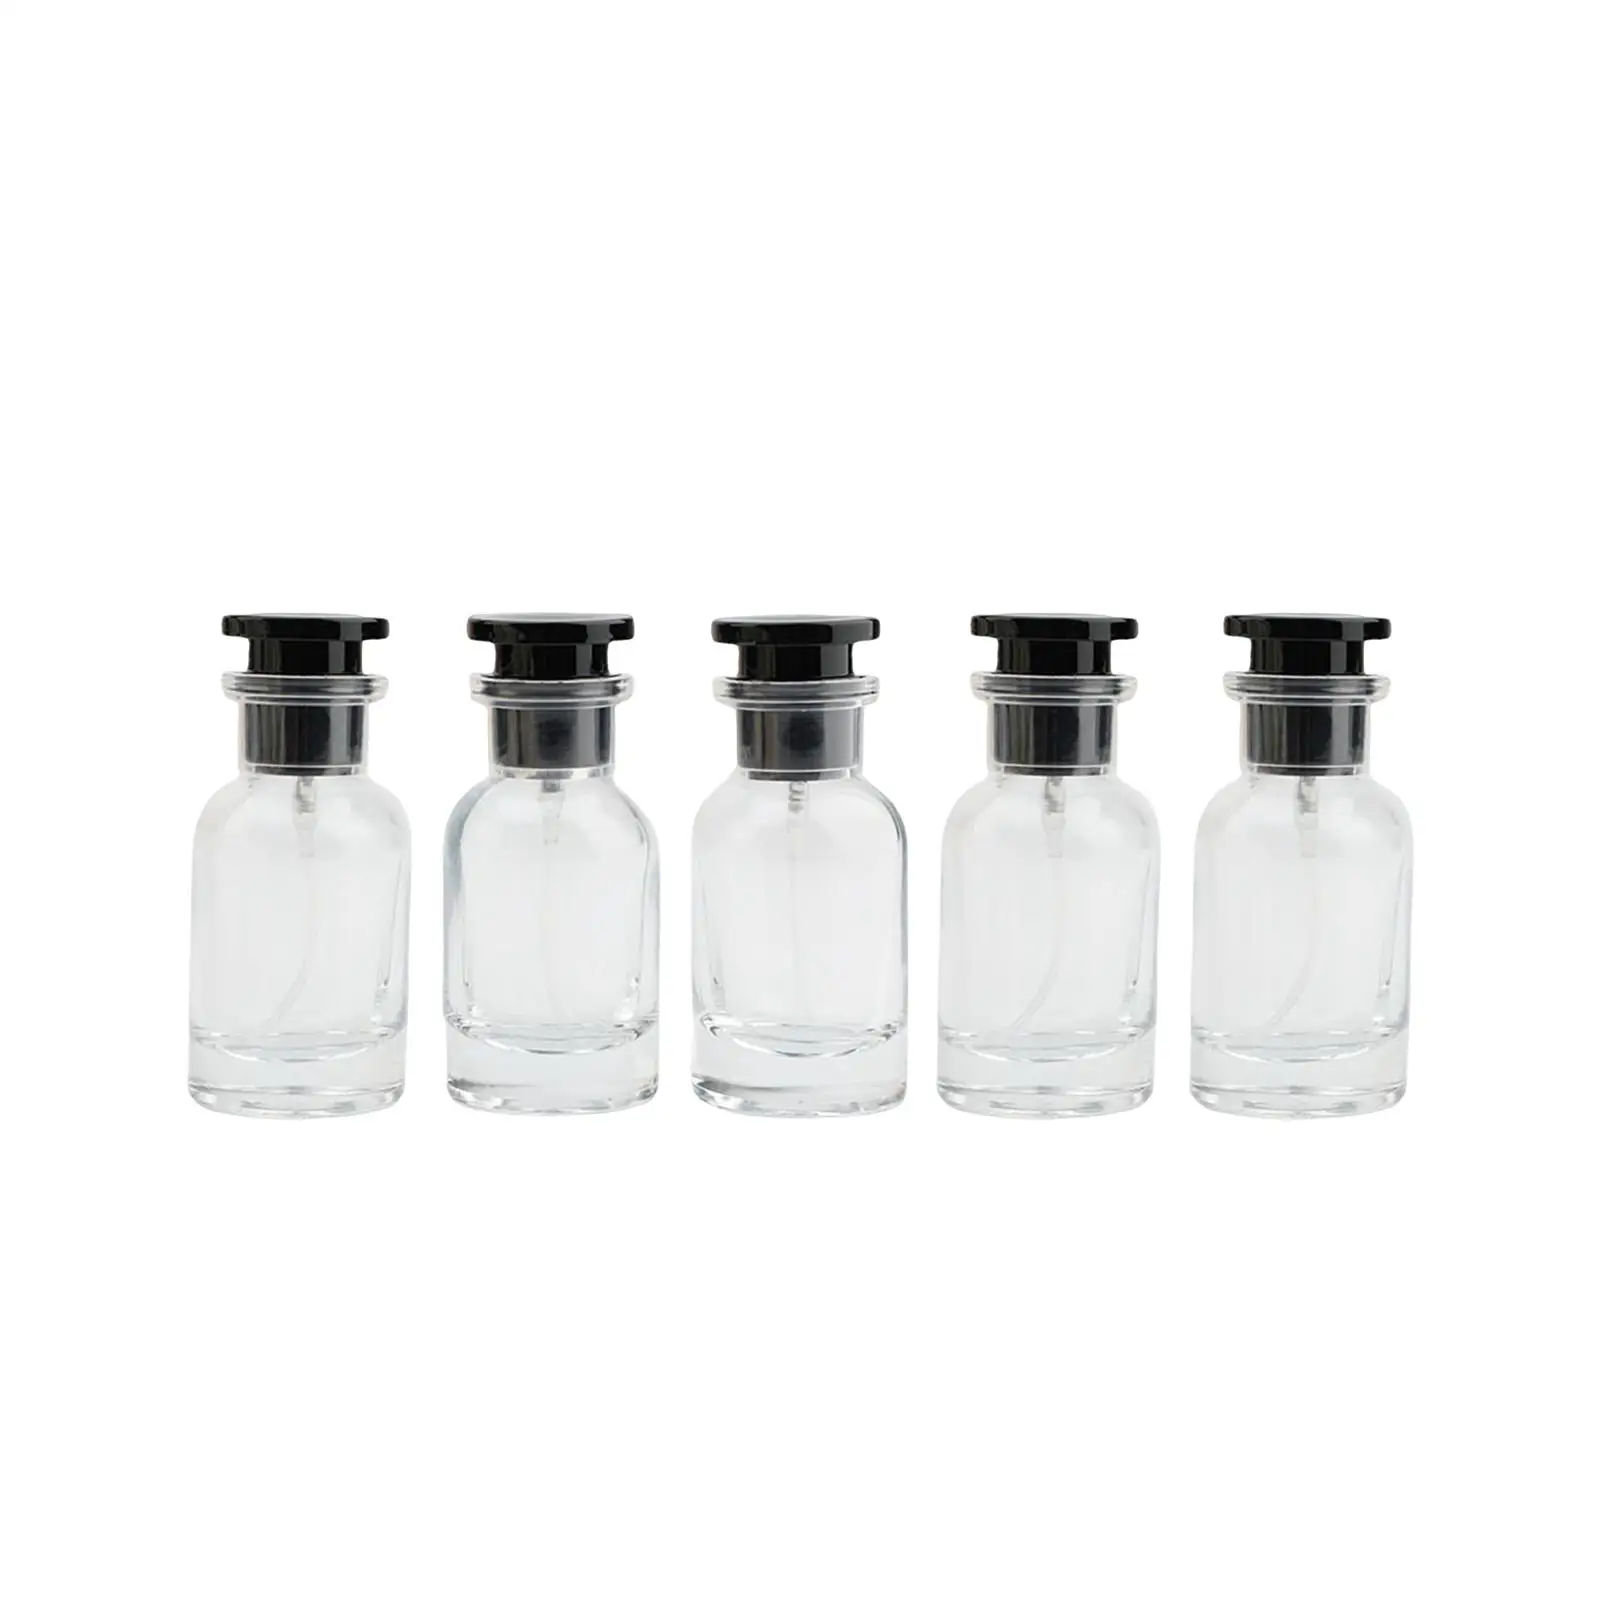 5x Perfume Spray Bottle 30ml Lightweight Small Durable Trip Pump Bottle Vintage Delicate Portable Glass Makeup Tool Empty Spray